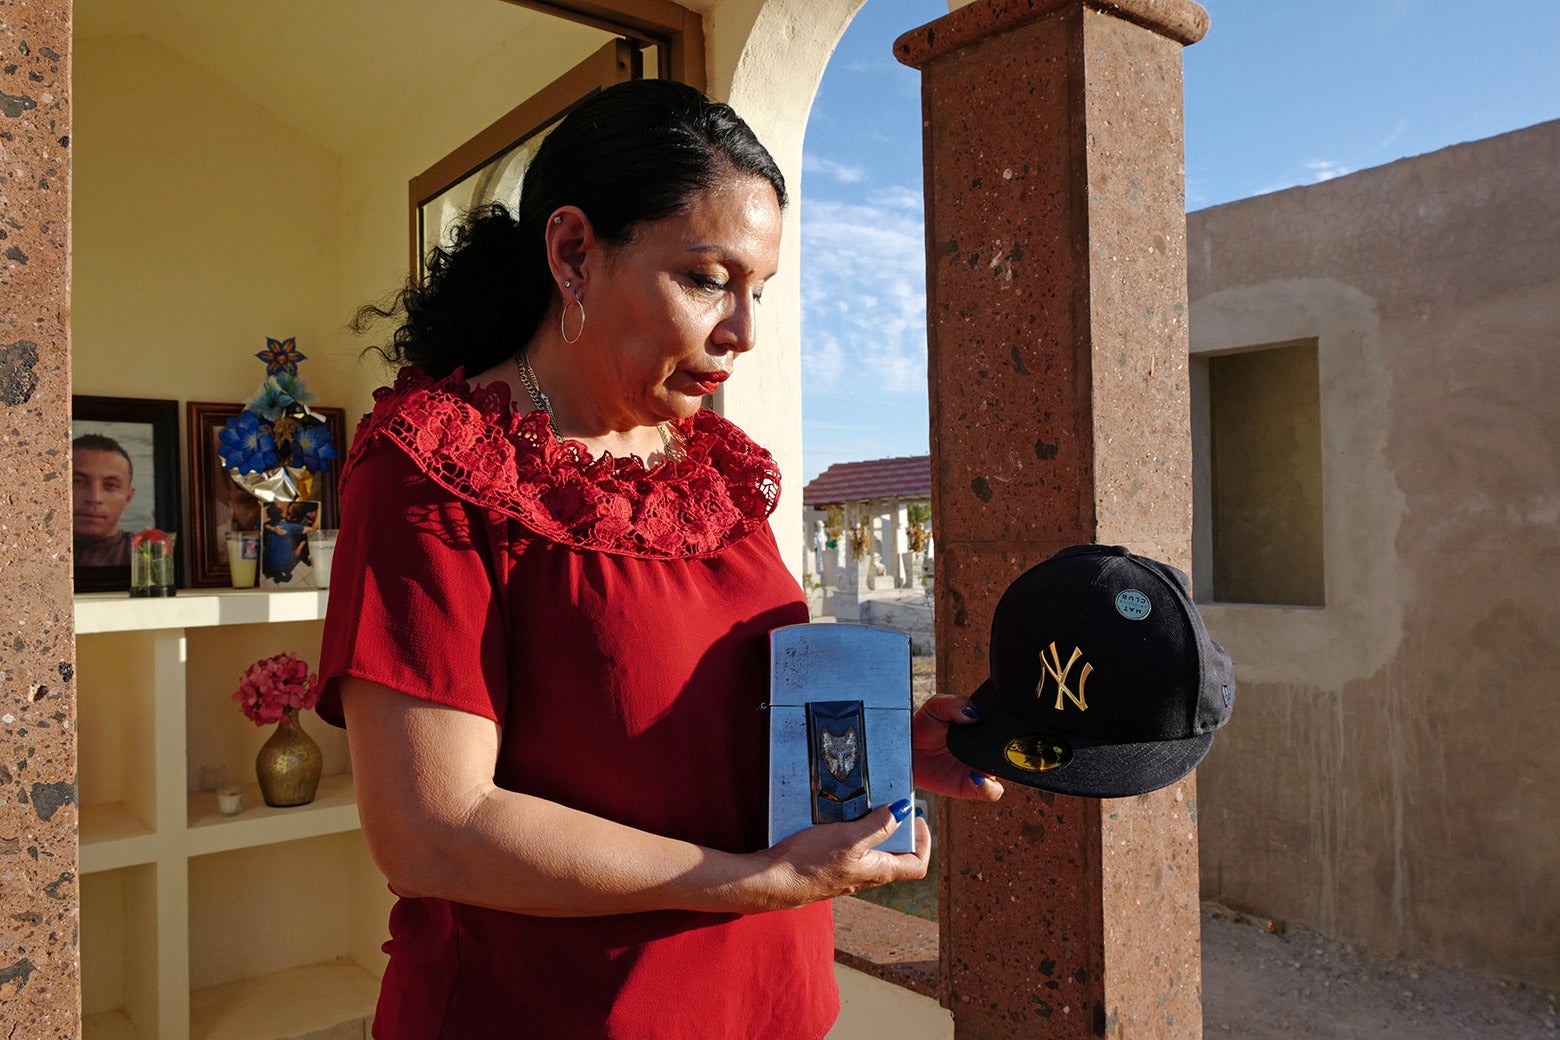 Cecilia, wearing a red dress, stands at her son's tomb in Hermosillo, Sonora, Mexico in May 2022 tearfullly holding a Yankees hat.